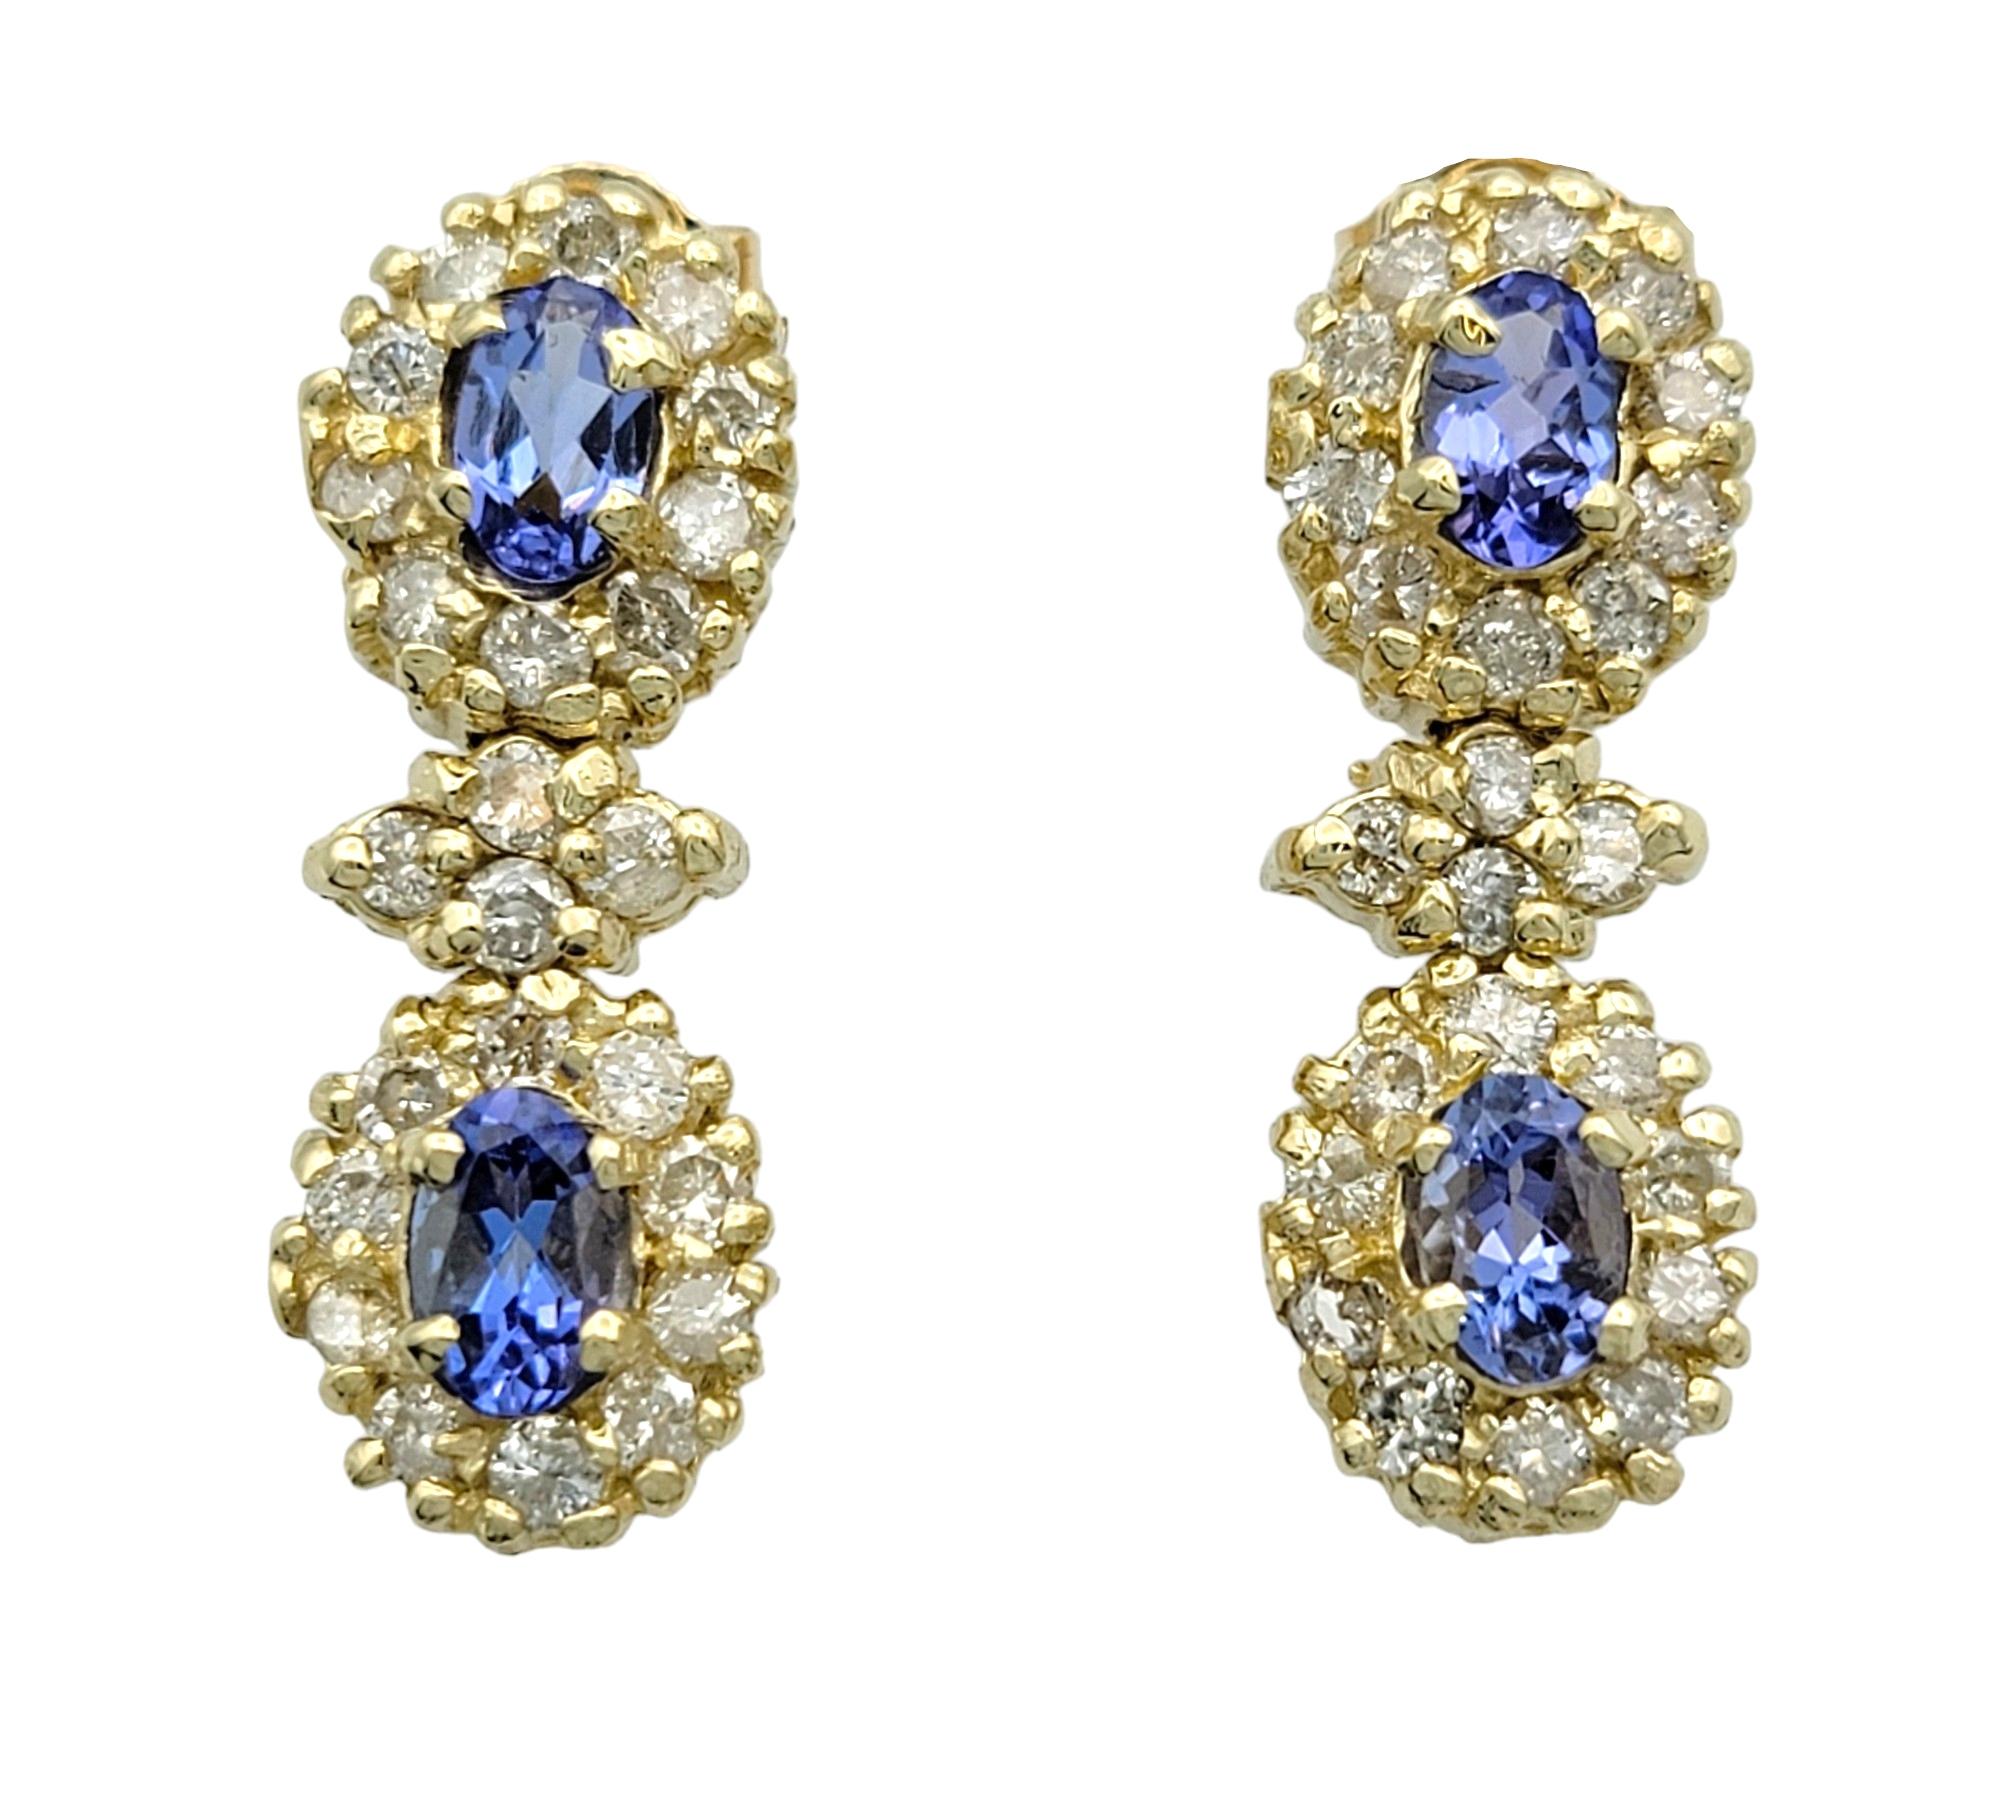 These captivating dangle earrings are a testament to elegance and sophistication, crafted to captivate attention with their mesmerizing beauty. Set in lustrous 14 karat yellow gold, each earring features two stunning oval tanzanites, boasting a